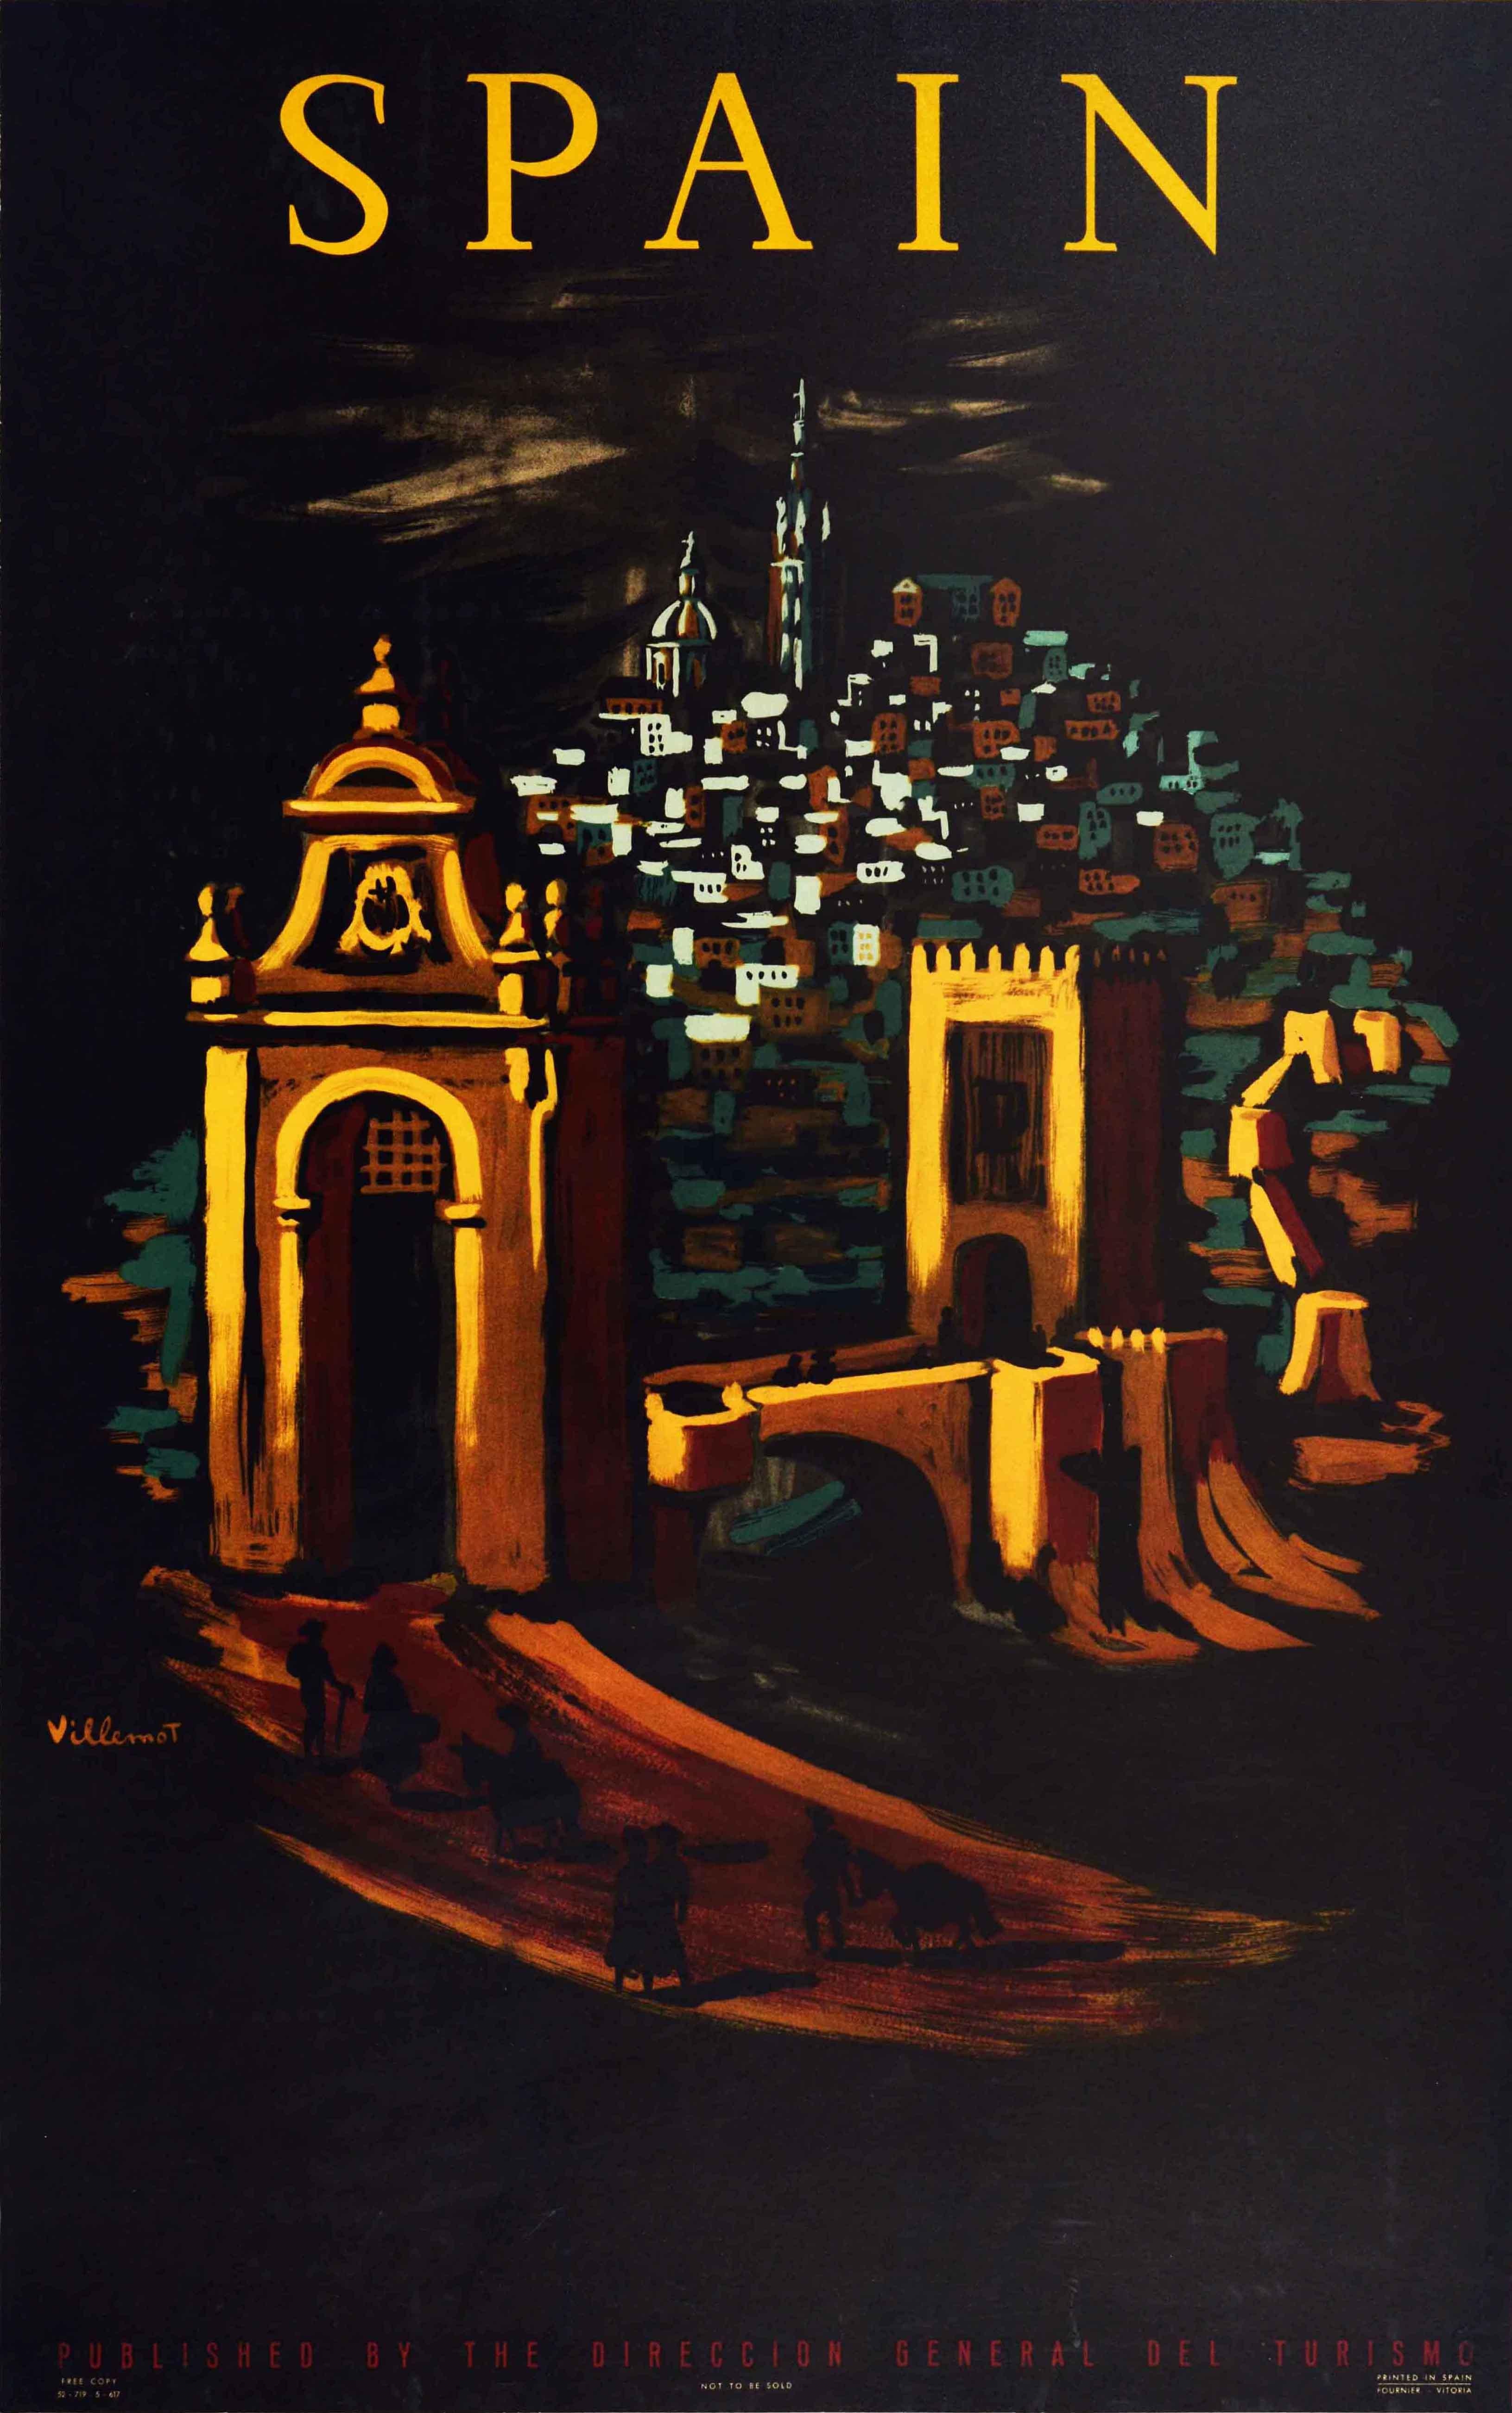 Original vintage travel poster for Spain featuring great artwork by the notable French graphic artist Bernard Villemot (1911-1989) depicting a Spanish town at night with historic church towers and buildings, and silhouettes of people with donkeys